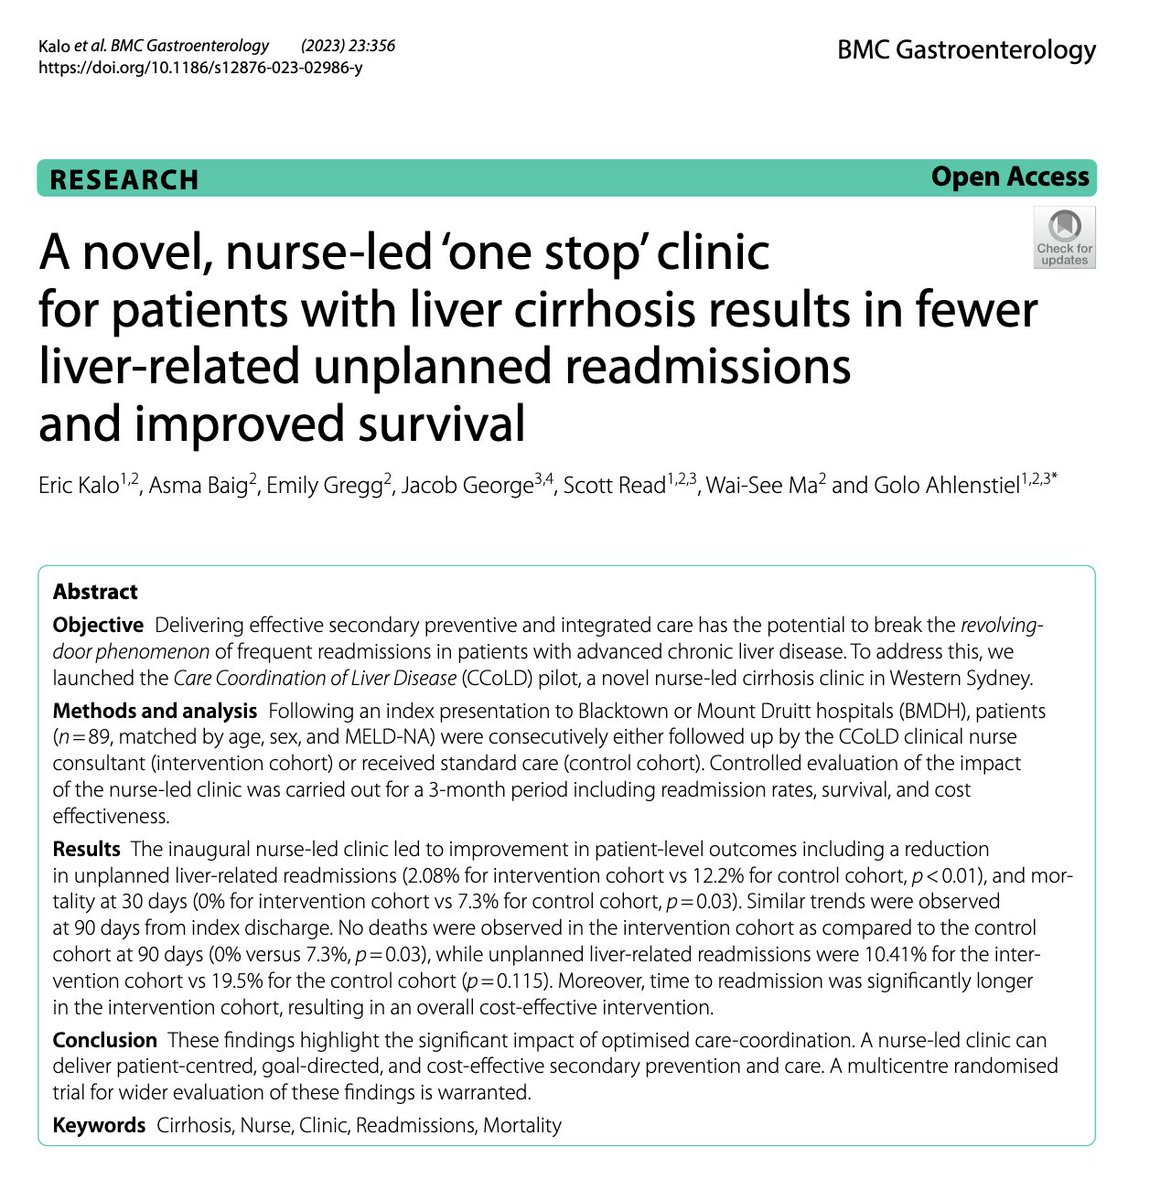 Decreasing readmissions in cirrhosis is key in liver centers. There is an emerging role for SPECIALIZED NURSES. This relevant study shows that a NURSE-LED clinic results in fewer liver-related readmissions and improved survival. shorturl.at/gzFG3 #LiverTwitter @EASLedu